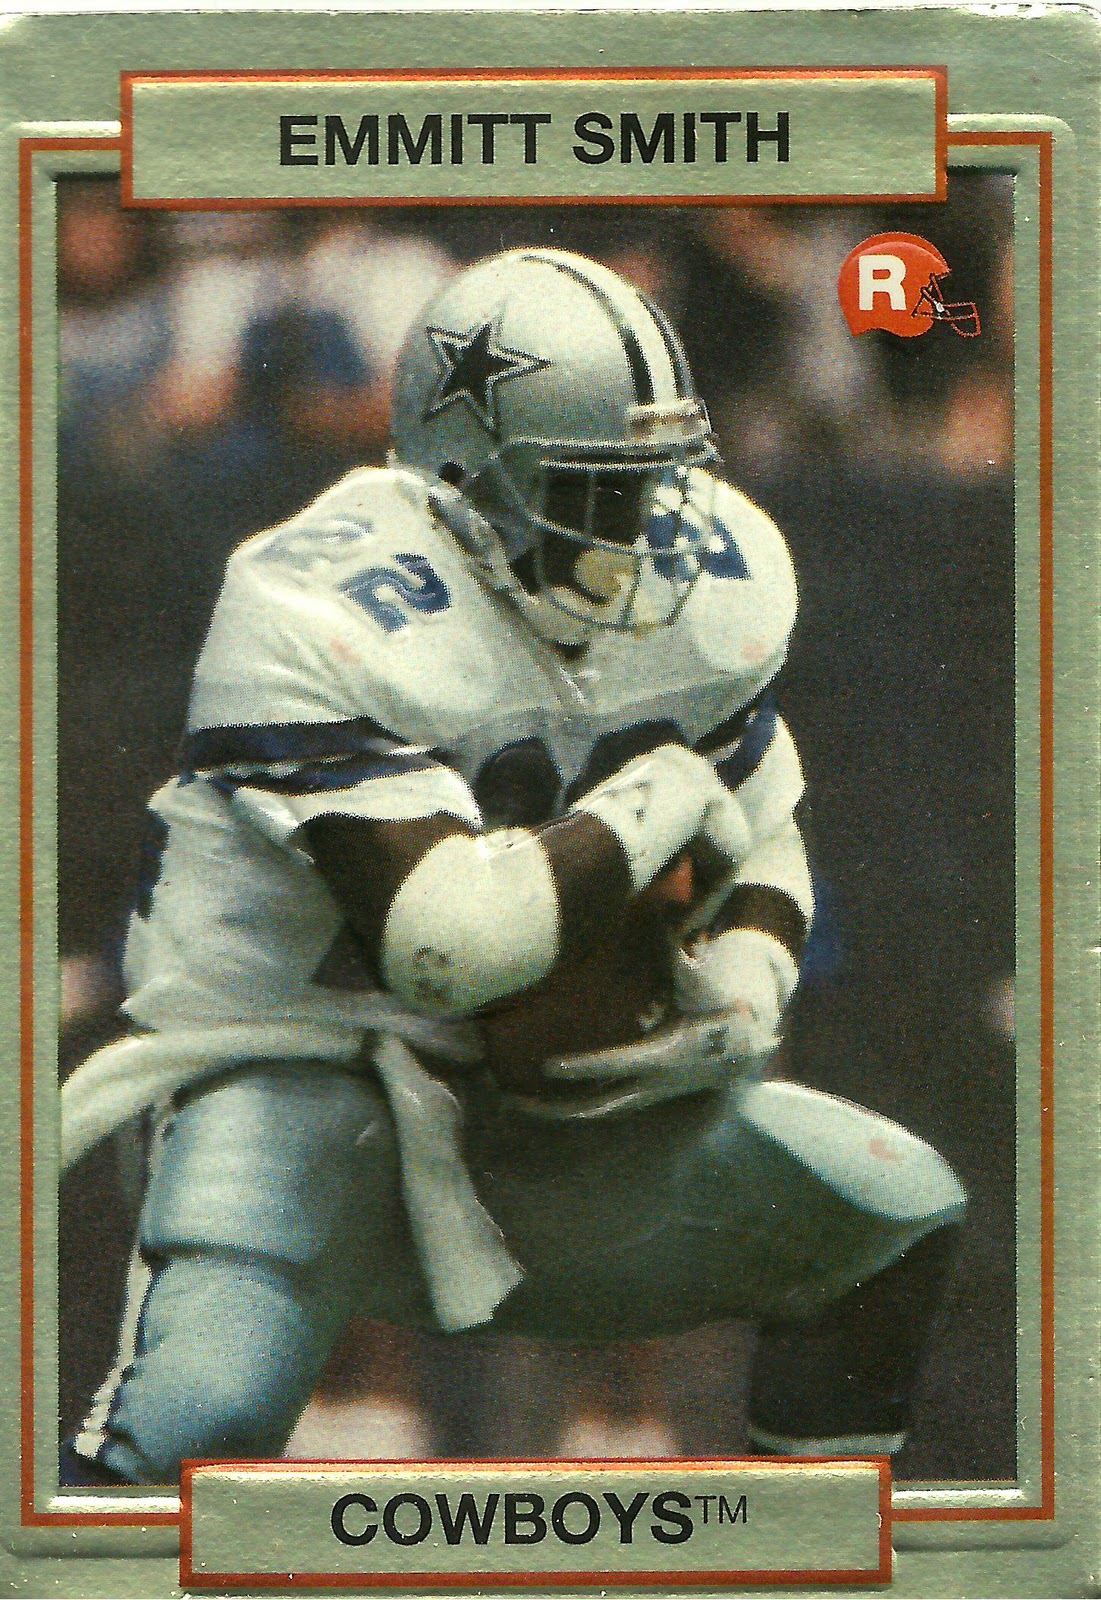 This is emmitt smith’s best rookie card. 